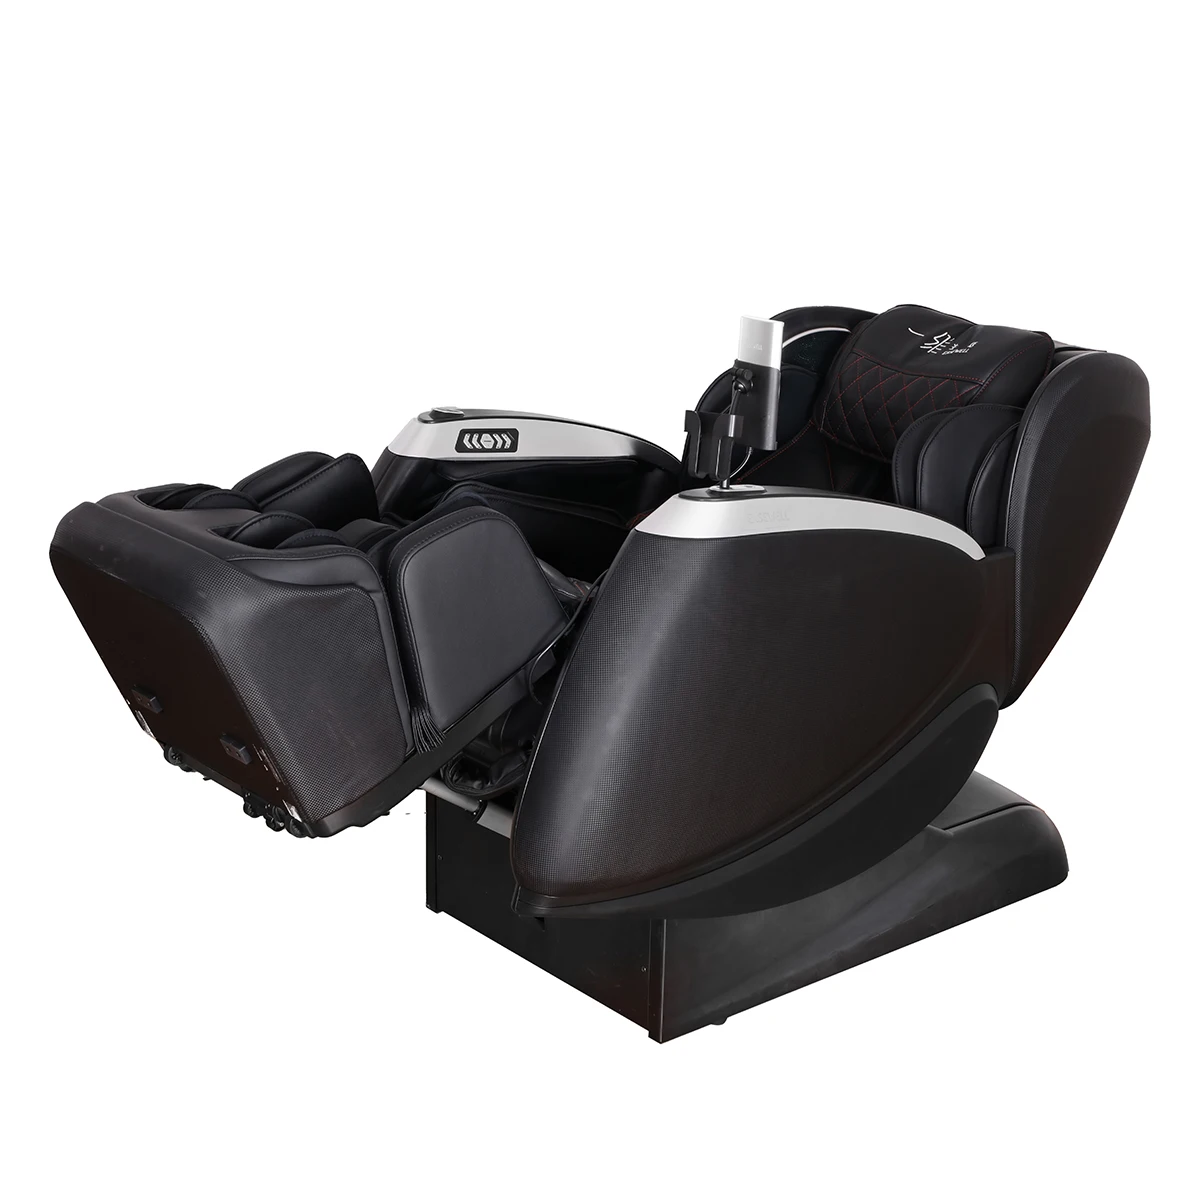 
2021 4D zero gravity EASEWELL luxury 3D massage chair of Full body Thai stretch and hot compress foot massage 